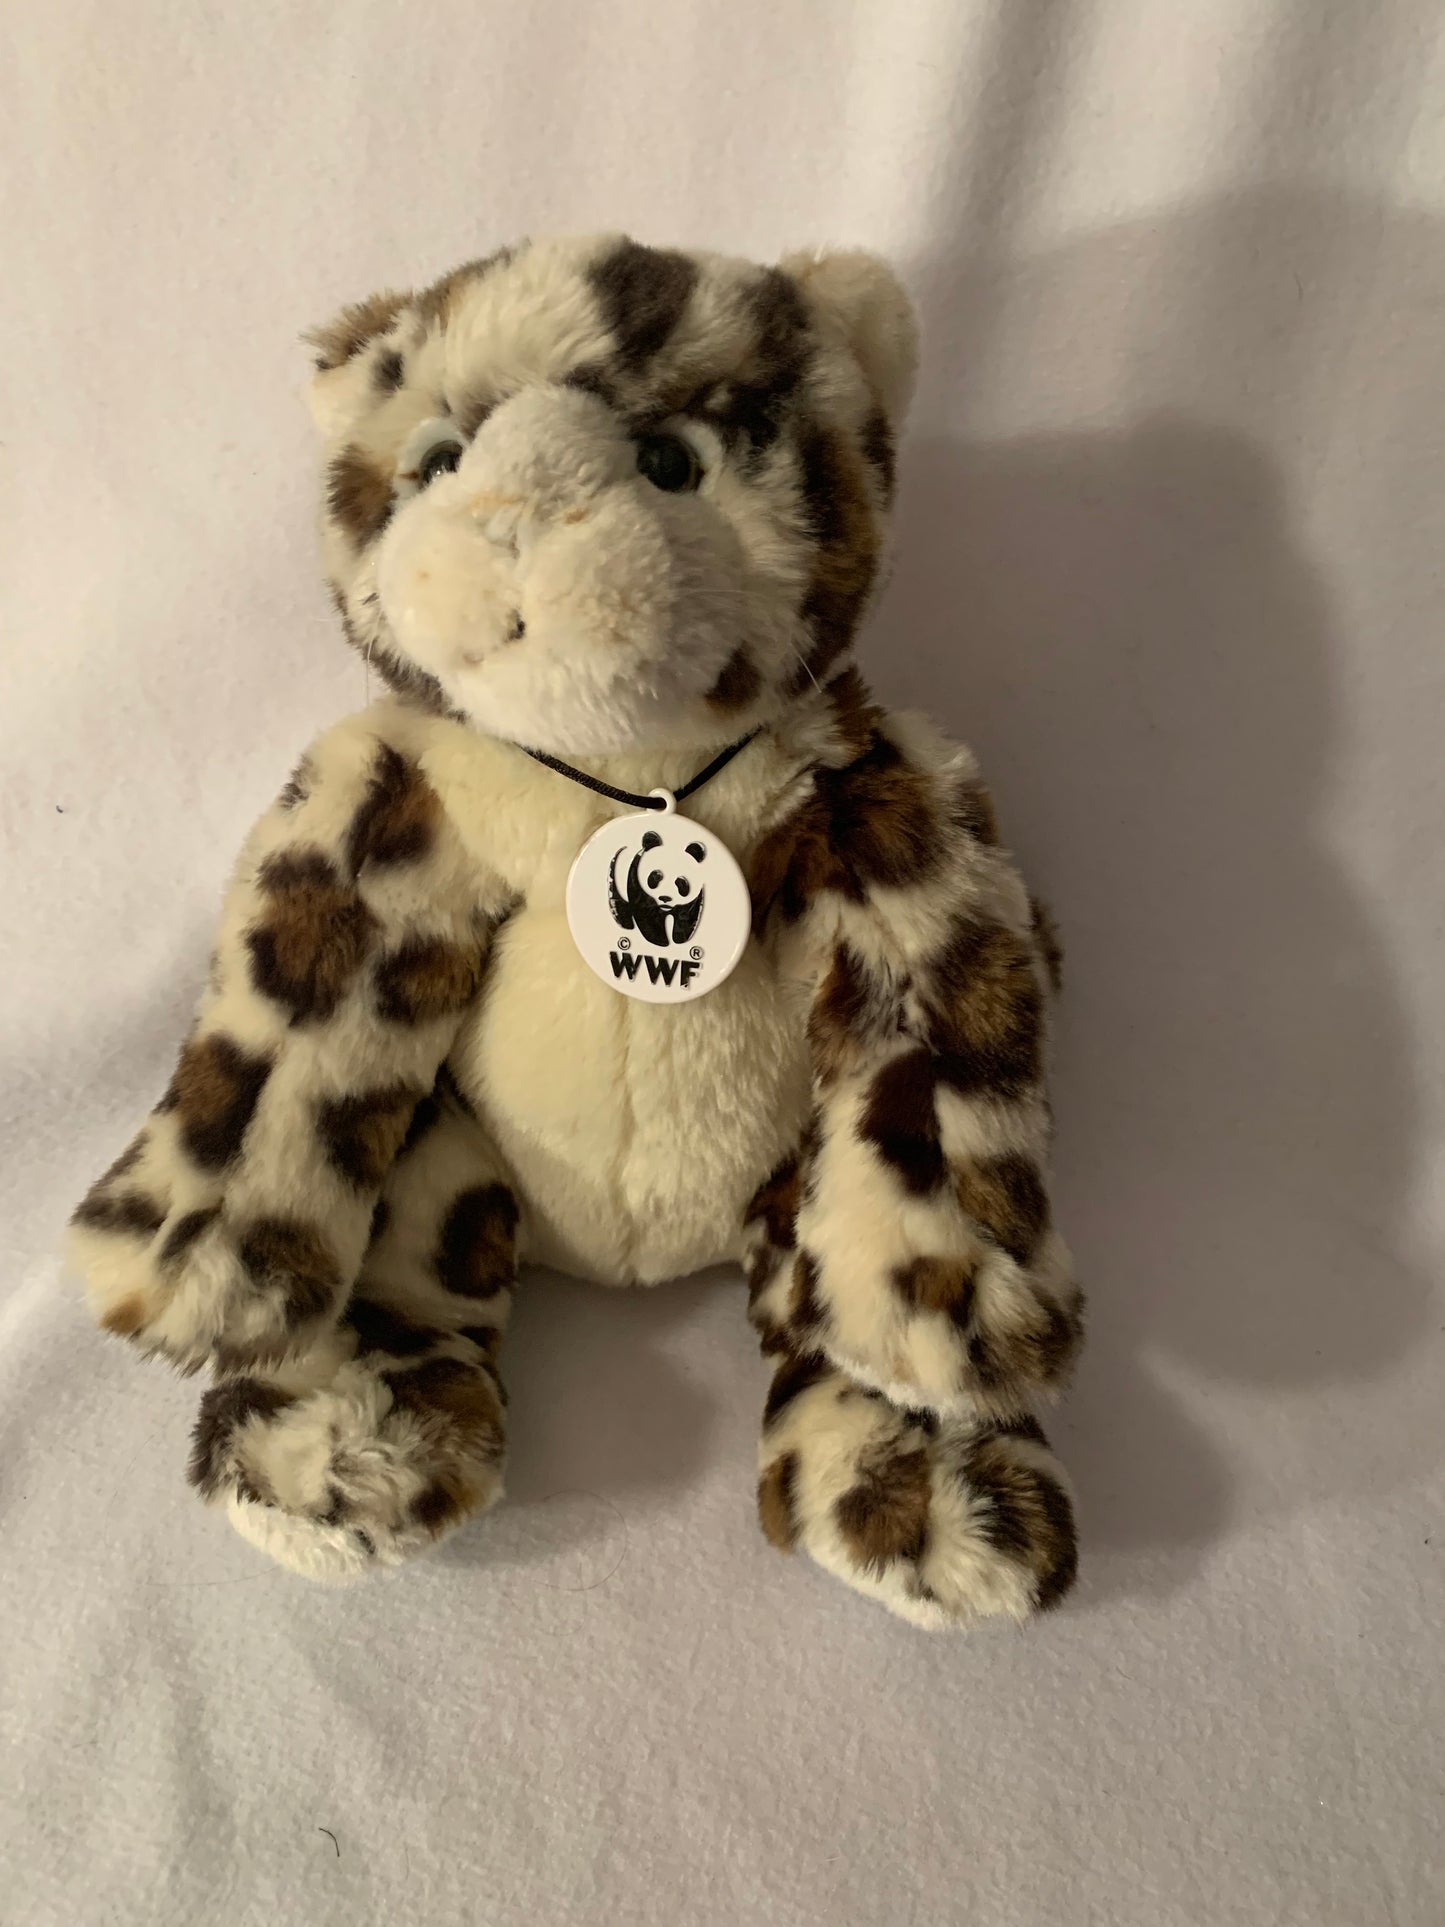 Weighted stuffed animal, lion, leopard or tiger with 4-5 lbs, Weighted Plush Jungle Cats, washable buddy